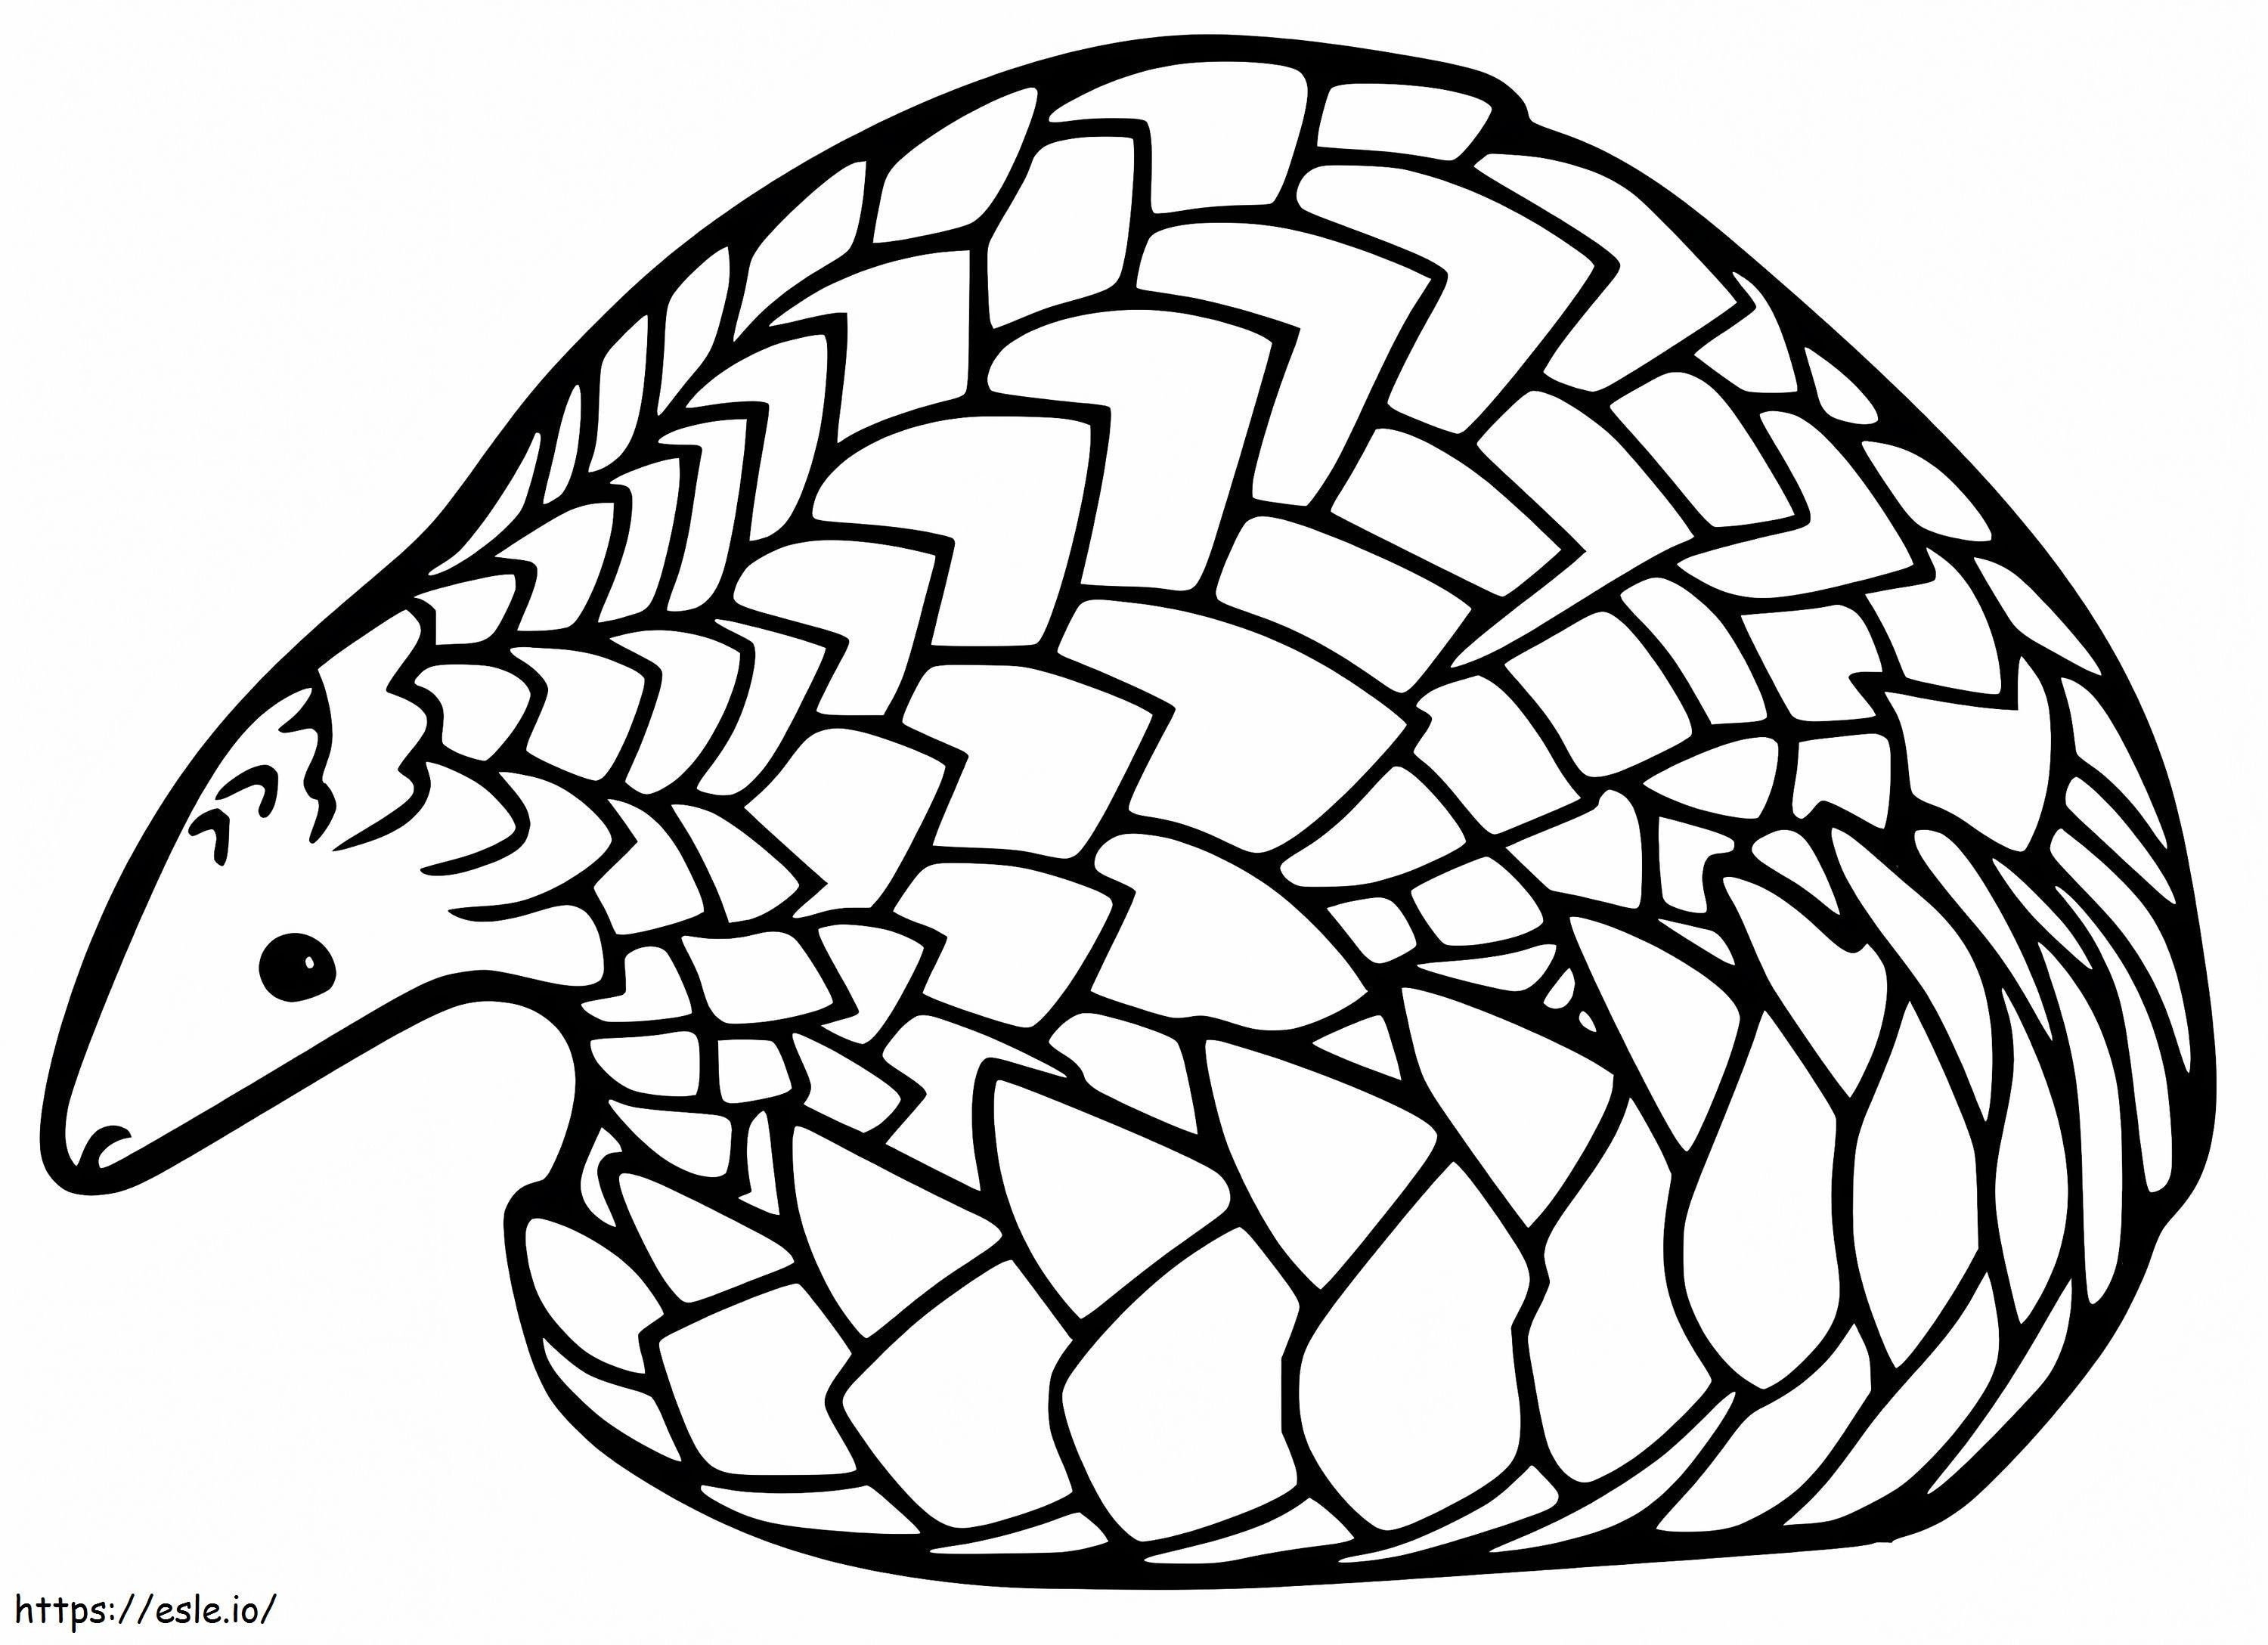 Little Pangolin coloring page